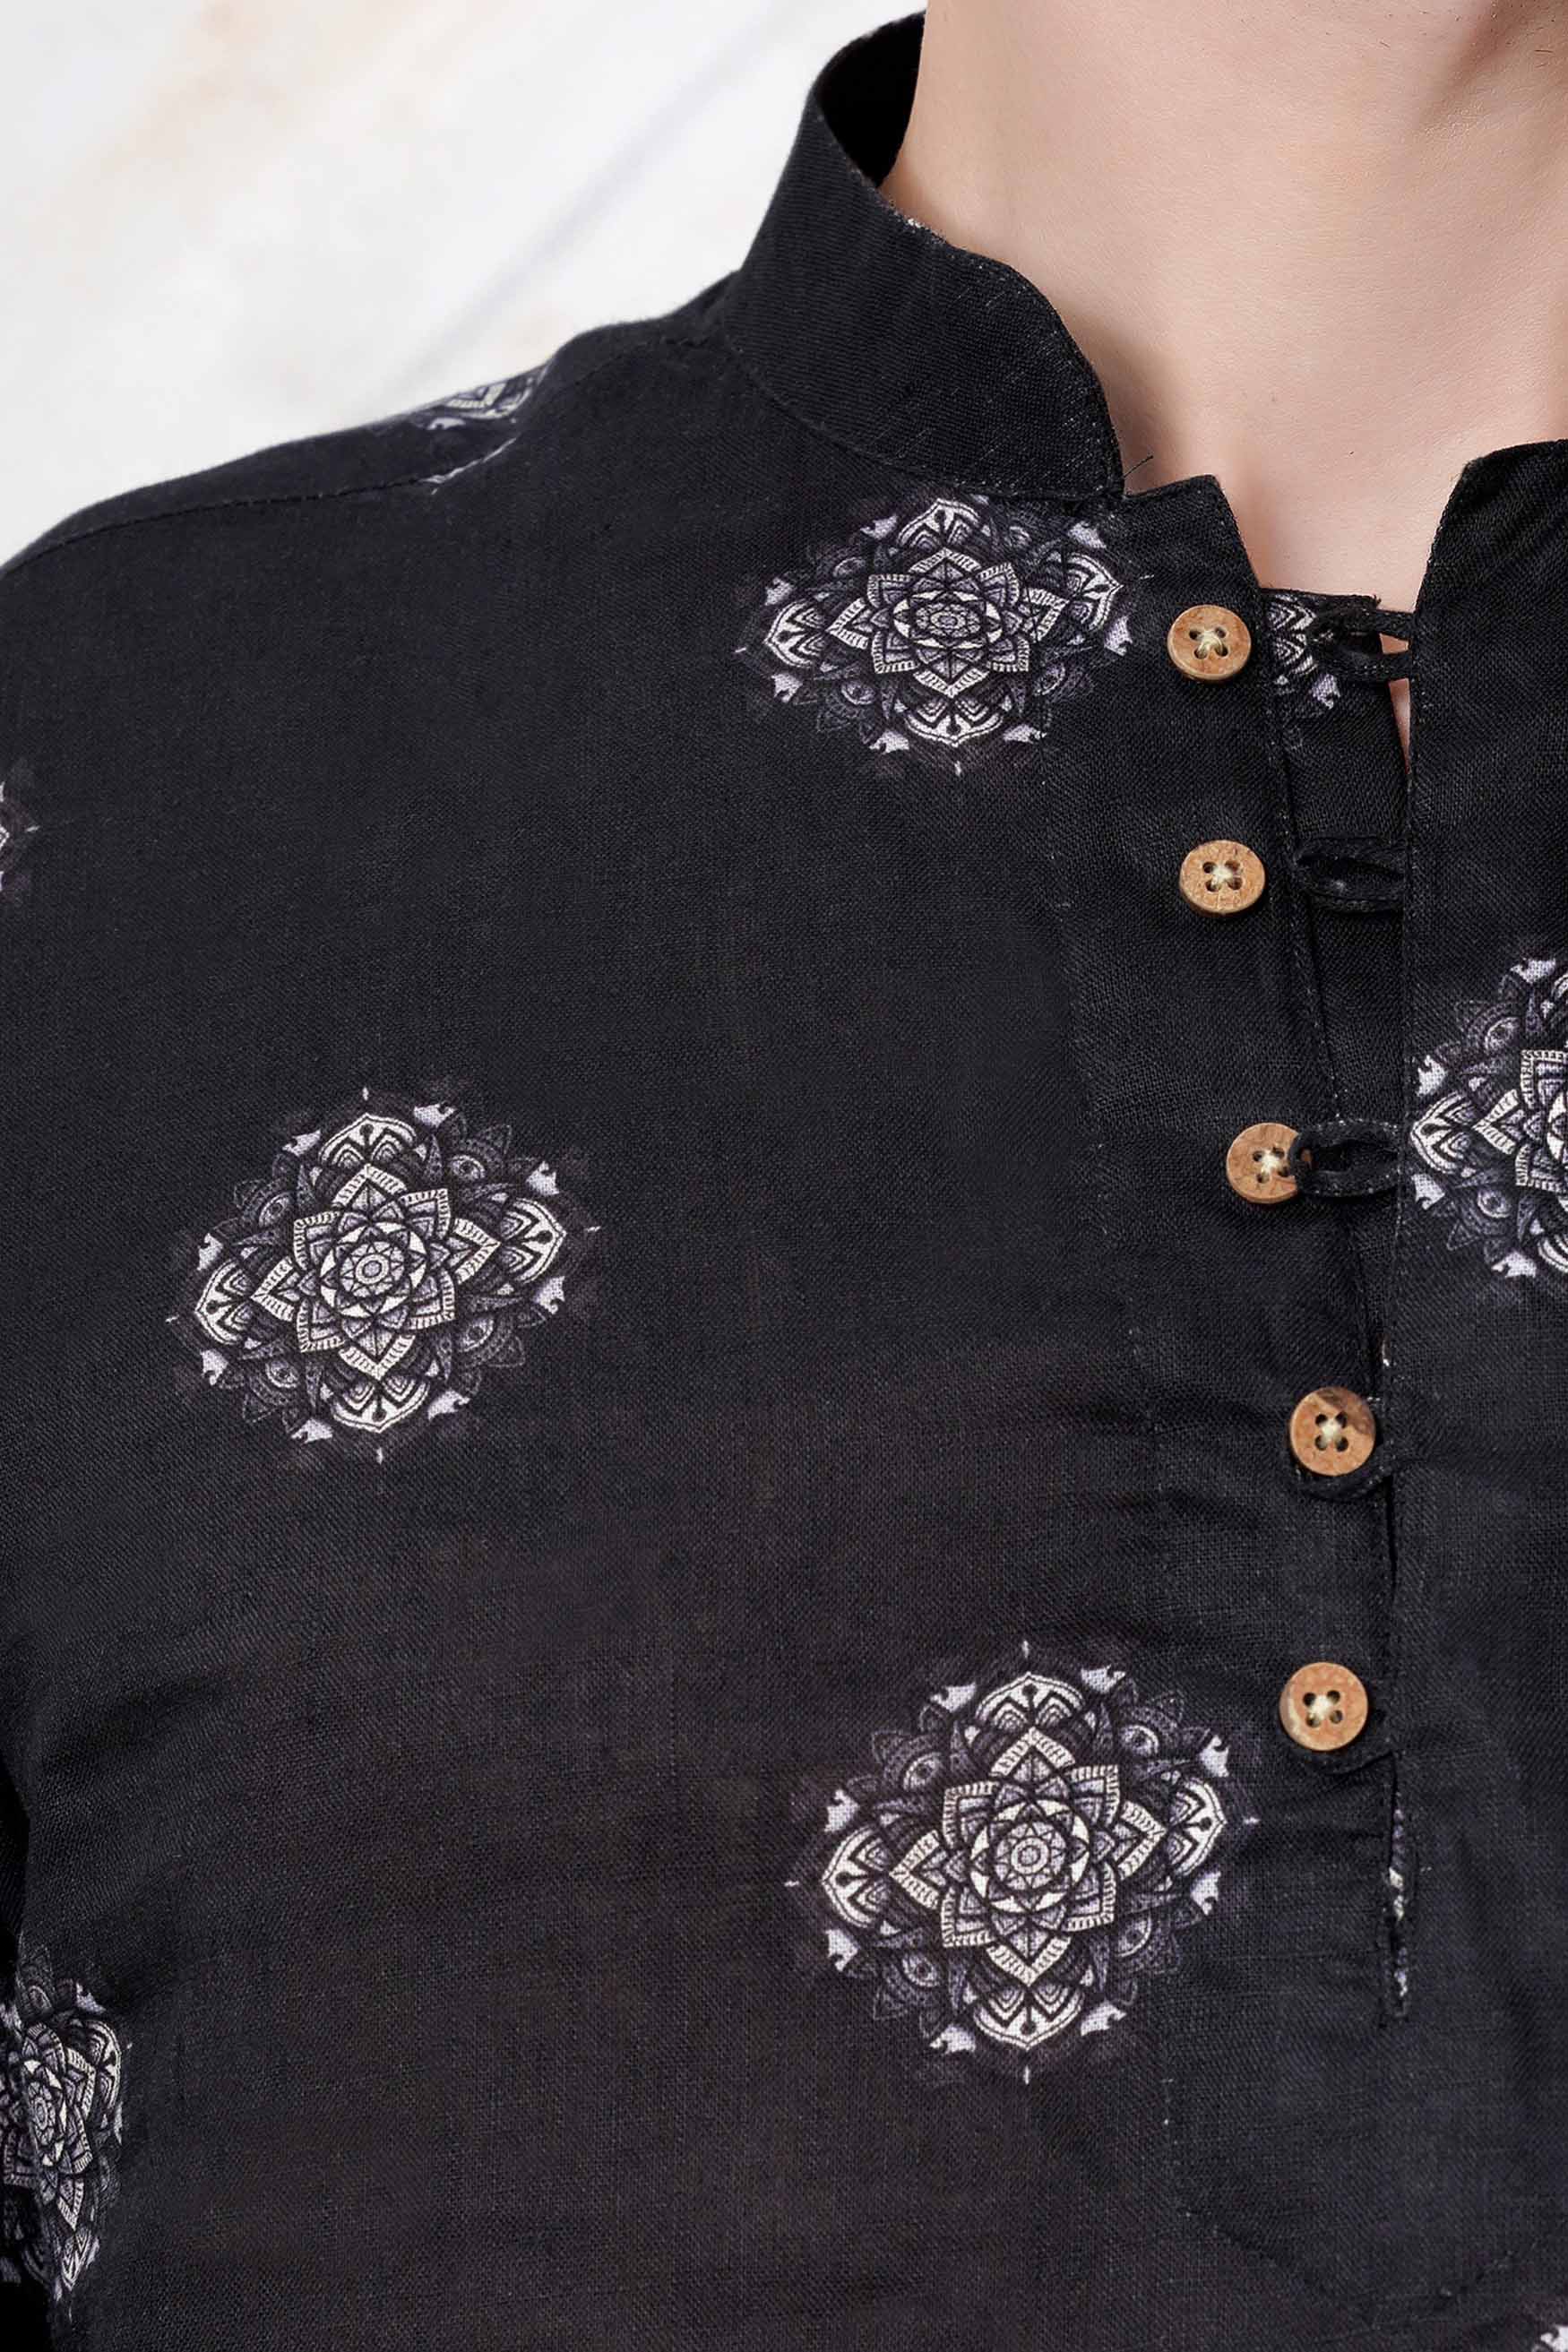 Jade Black and White Floral Printed Luxurious Linen Kurta Shirt 11487-KS-38, 11487-KS-H-38, 11487-KS-39, 11487-KS-H-39, 11487-KS-40, 11487-KS-H-40, 11487-KS-42, 11487-KS-H-42, 11487-KS-44, 11487-KS-H-44, 11487-KS-46, 11487-KS-H-46, 11487-KS-48, 11487-KS-H-48, 11487-KS-50, 11487-KS-H-50, 11487-KS-52, 11487-KS-H-52